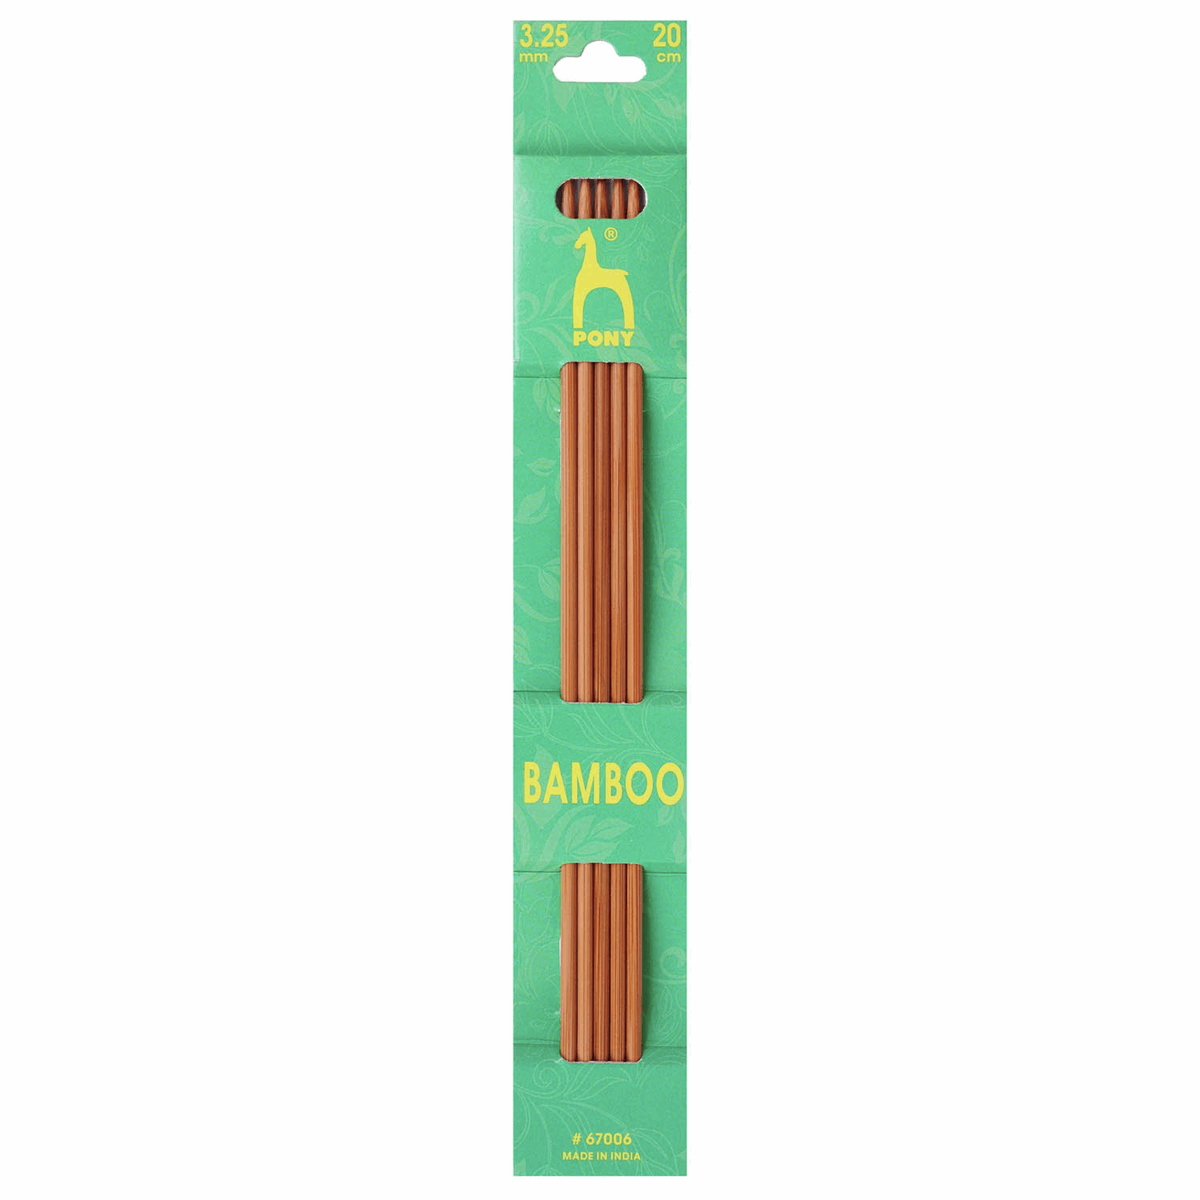 PONY Double-Ended Bamboo Knitting Pins - 20cm x 3.25mm (Set of 5)